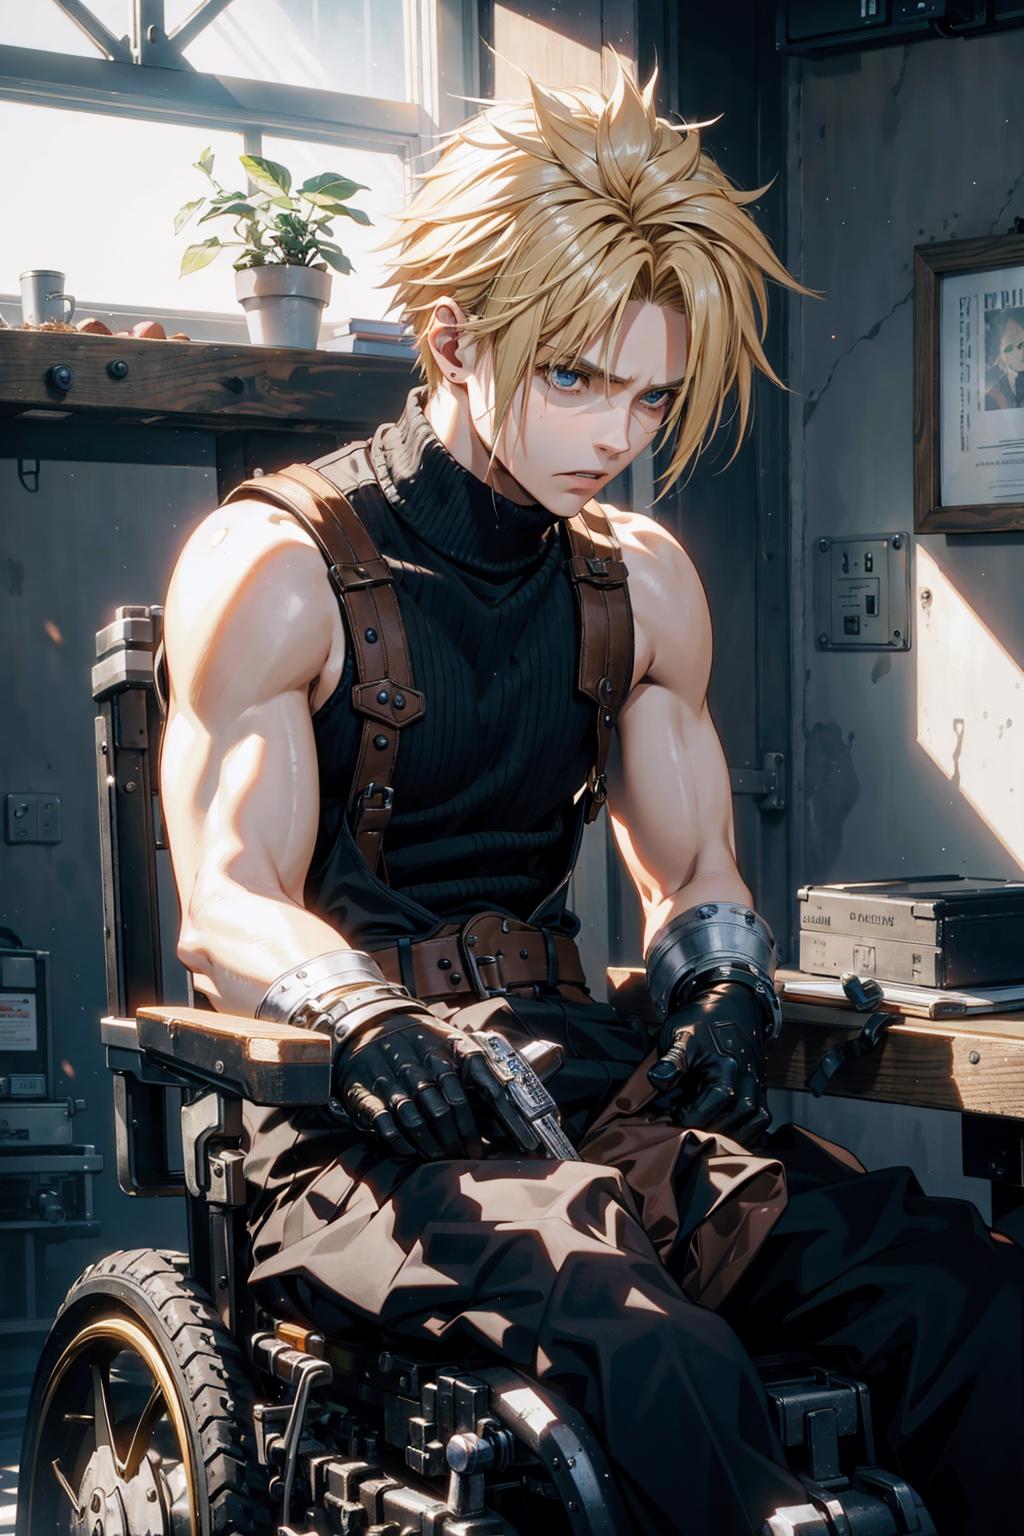 Anime character with yellow hair and black shirt holding a gun.